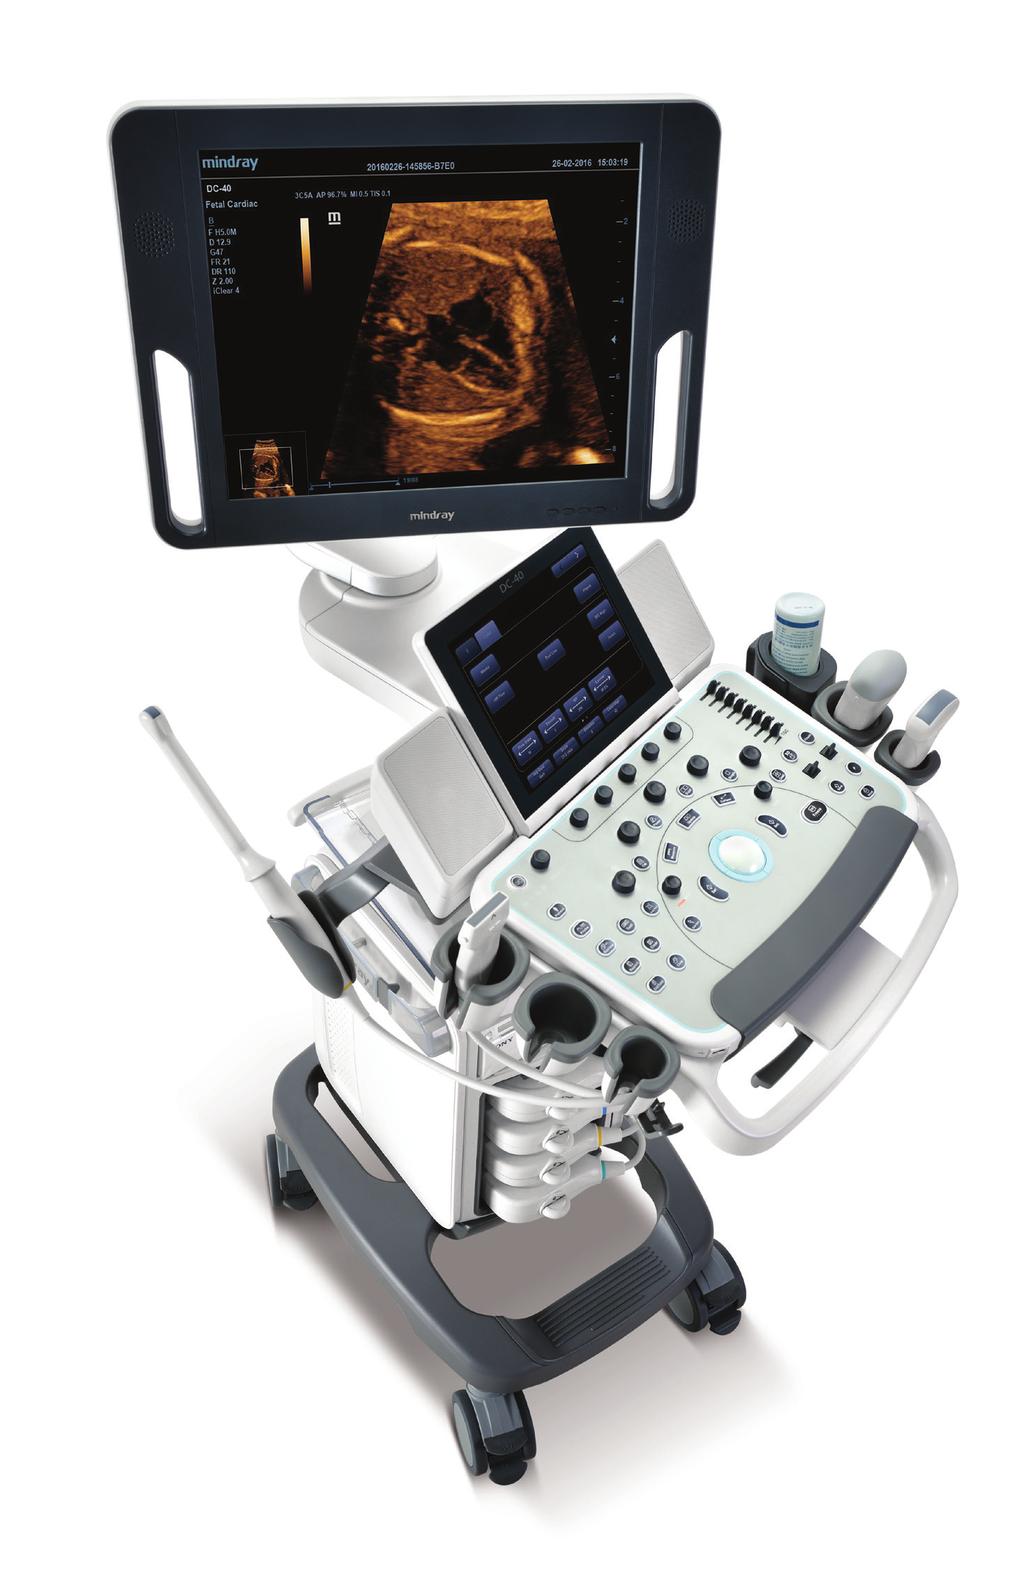 Enhanced diagnostic confidence The DC-40 offers balanced performance across a wide range of applications and produces advanced image quality in a wide variety of patient types.